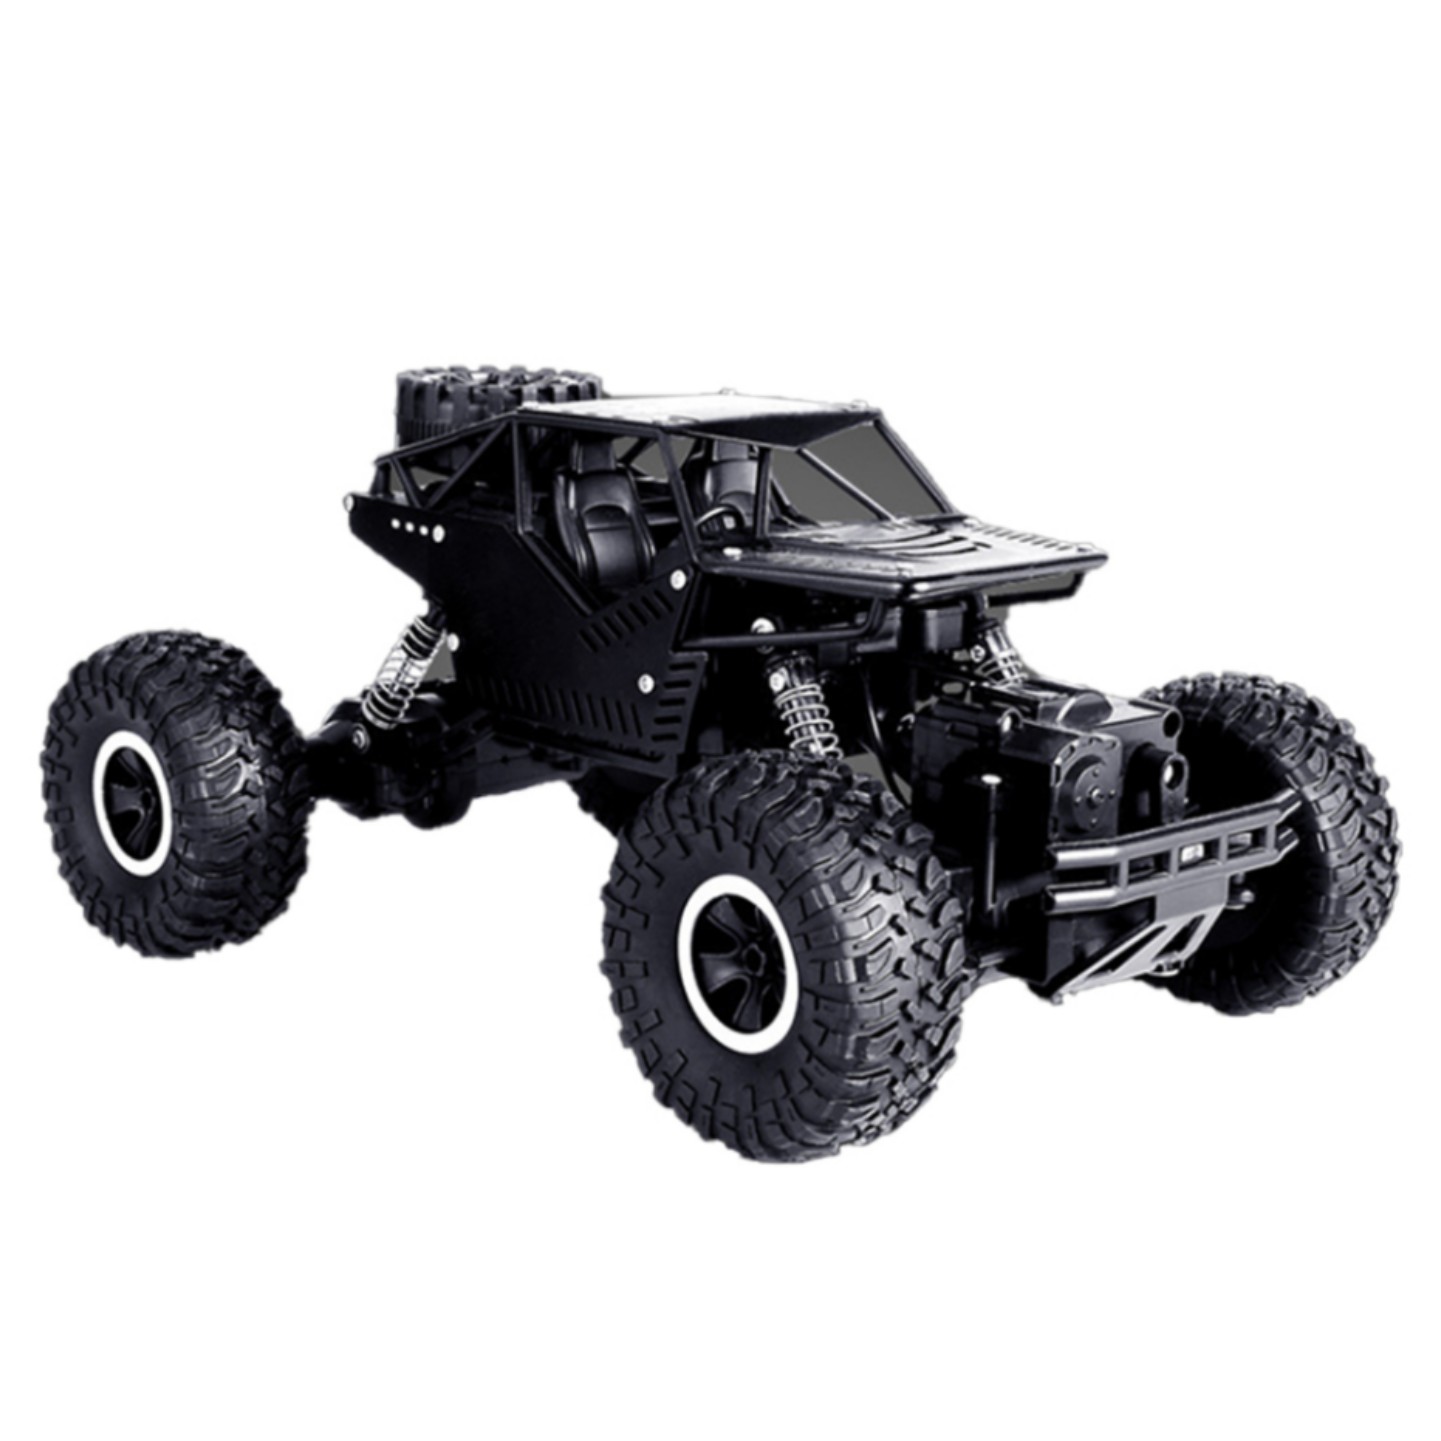 1:16 Alloy Remote Control Car Toy Model 4wd Rechargeable High Speed Off-Road Vehicle RC Climbing Car Toys